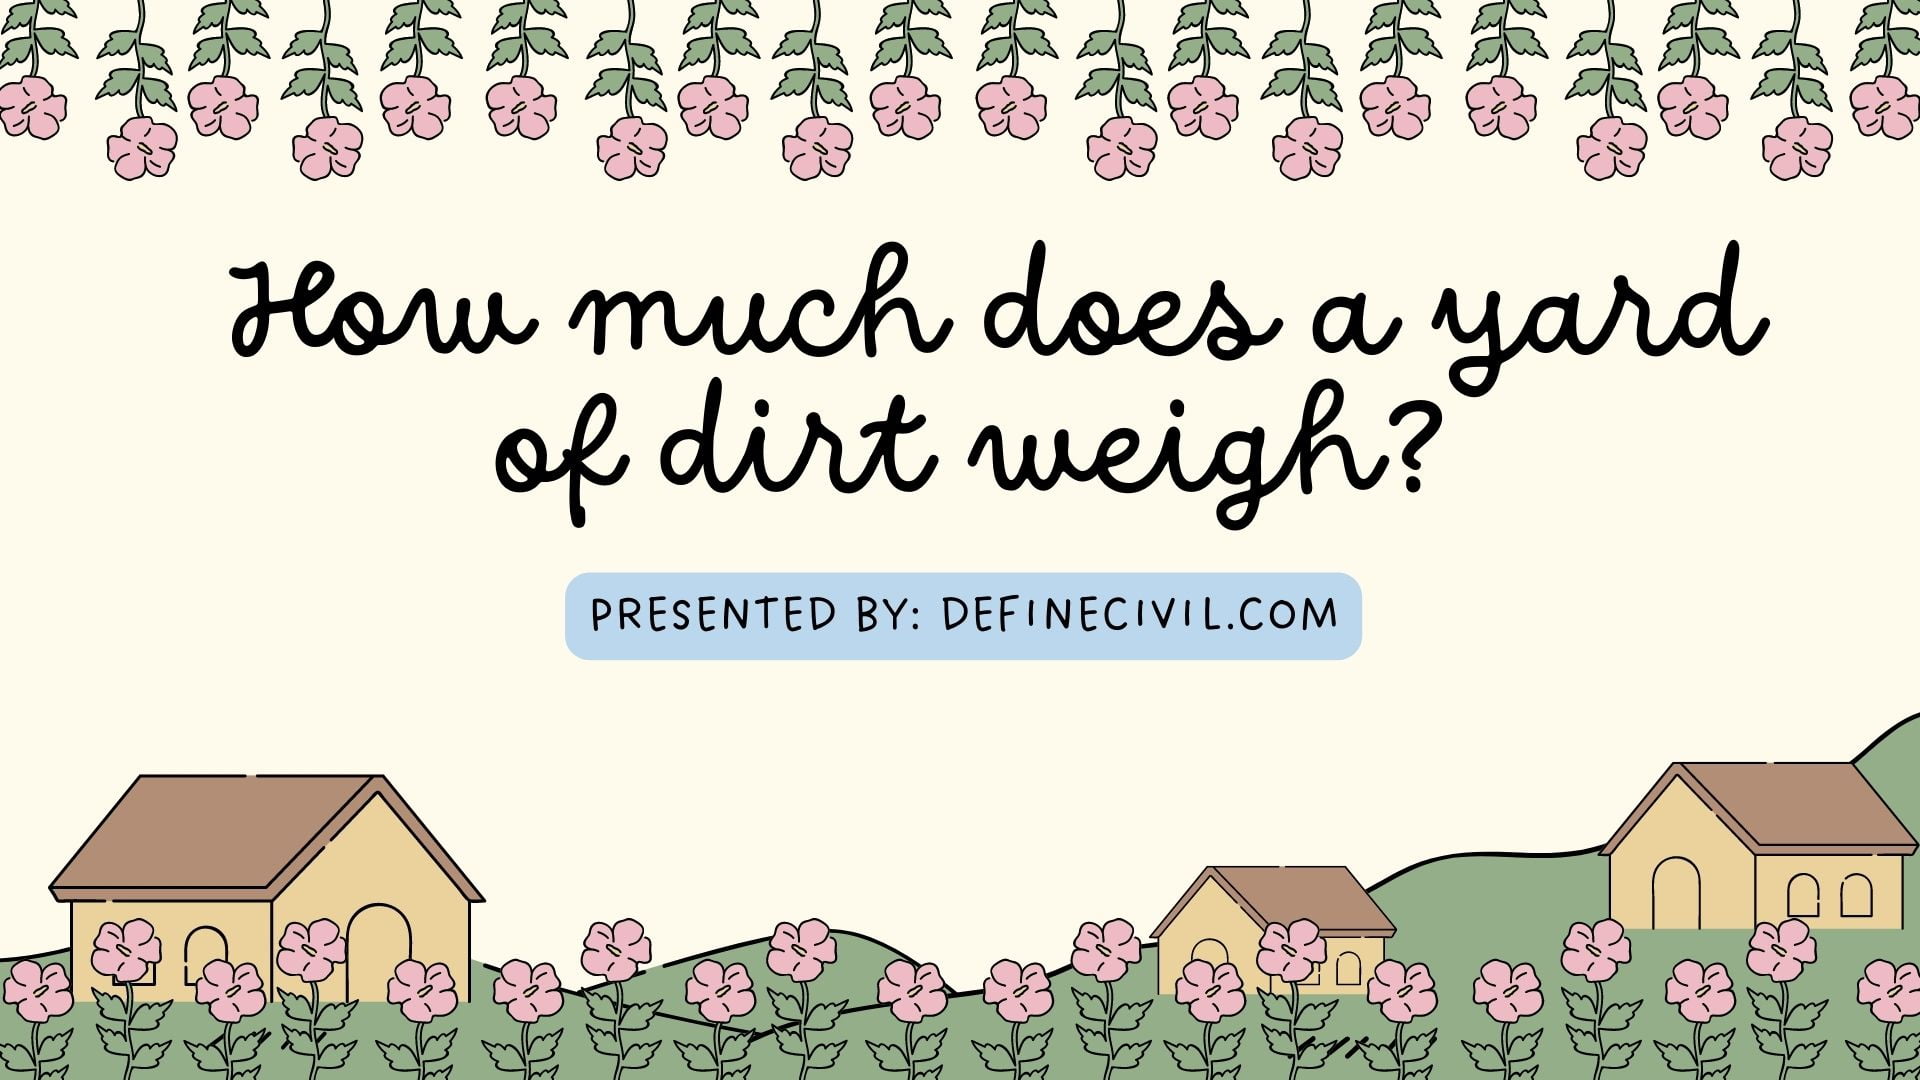 How much does a yard of dirt weigh